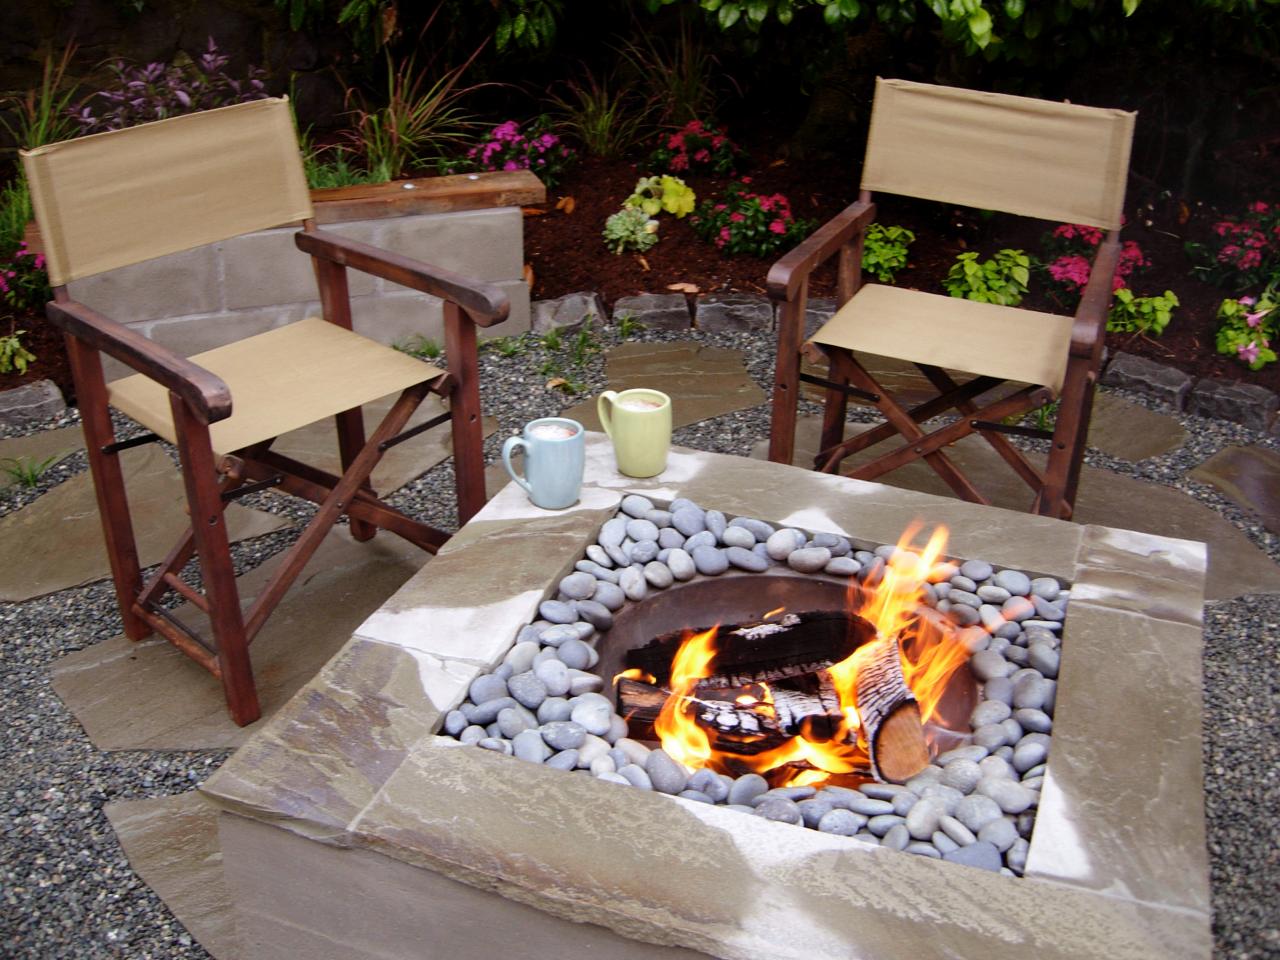 How To Make A Concrete Fire Feature, Can I Make A Concrete Fire Pit